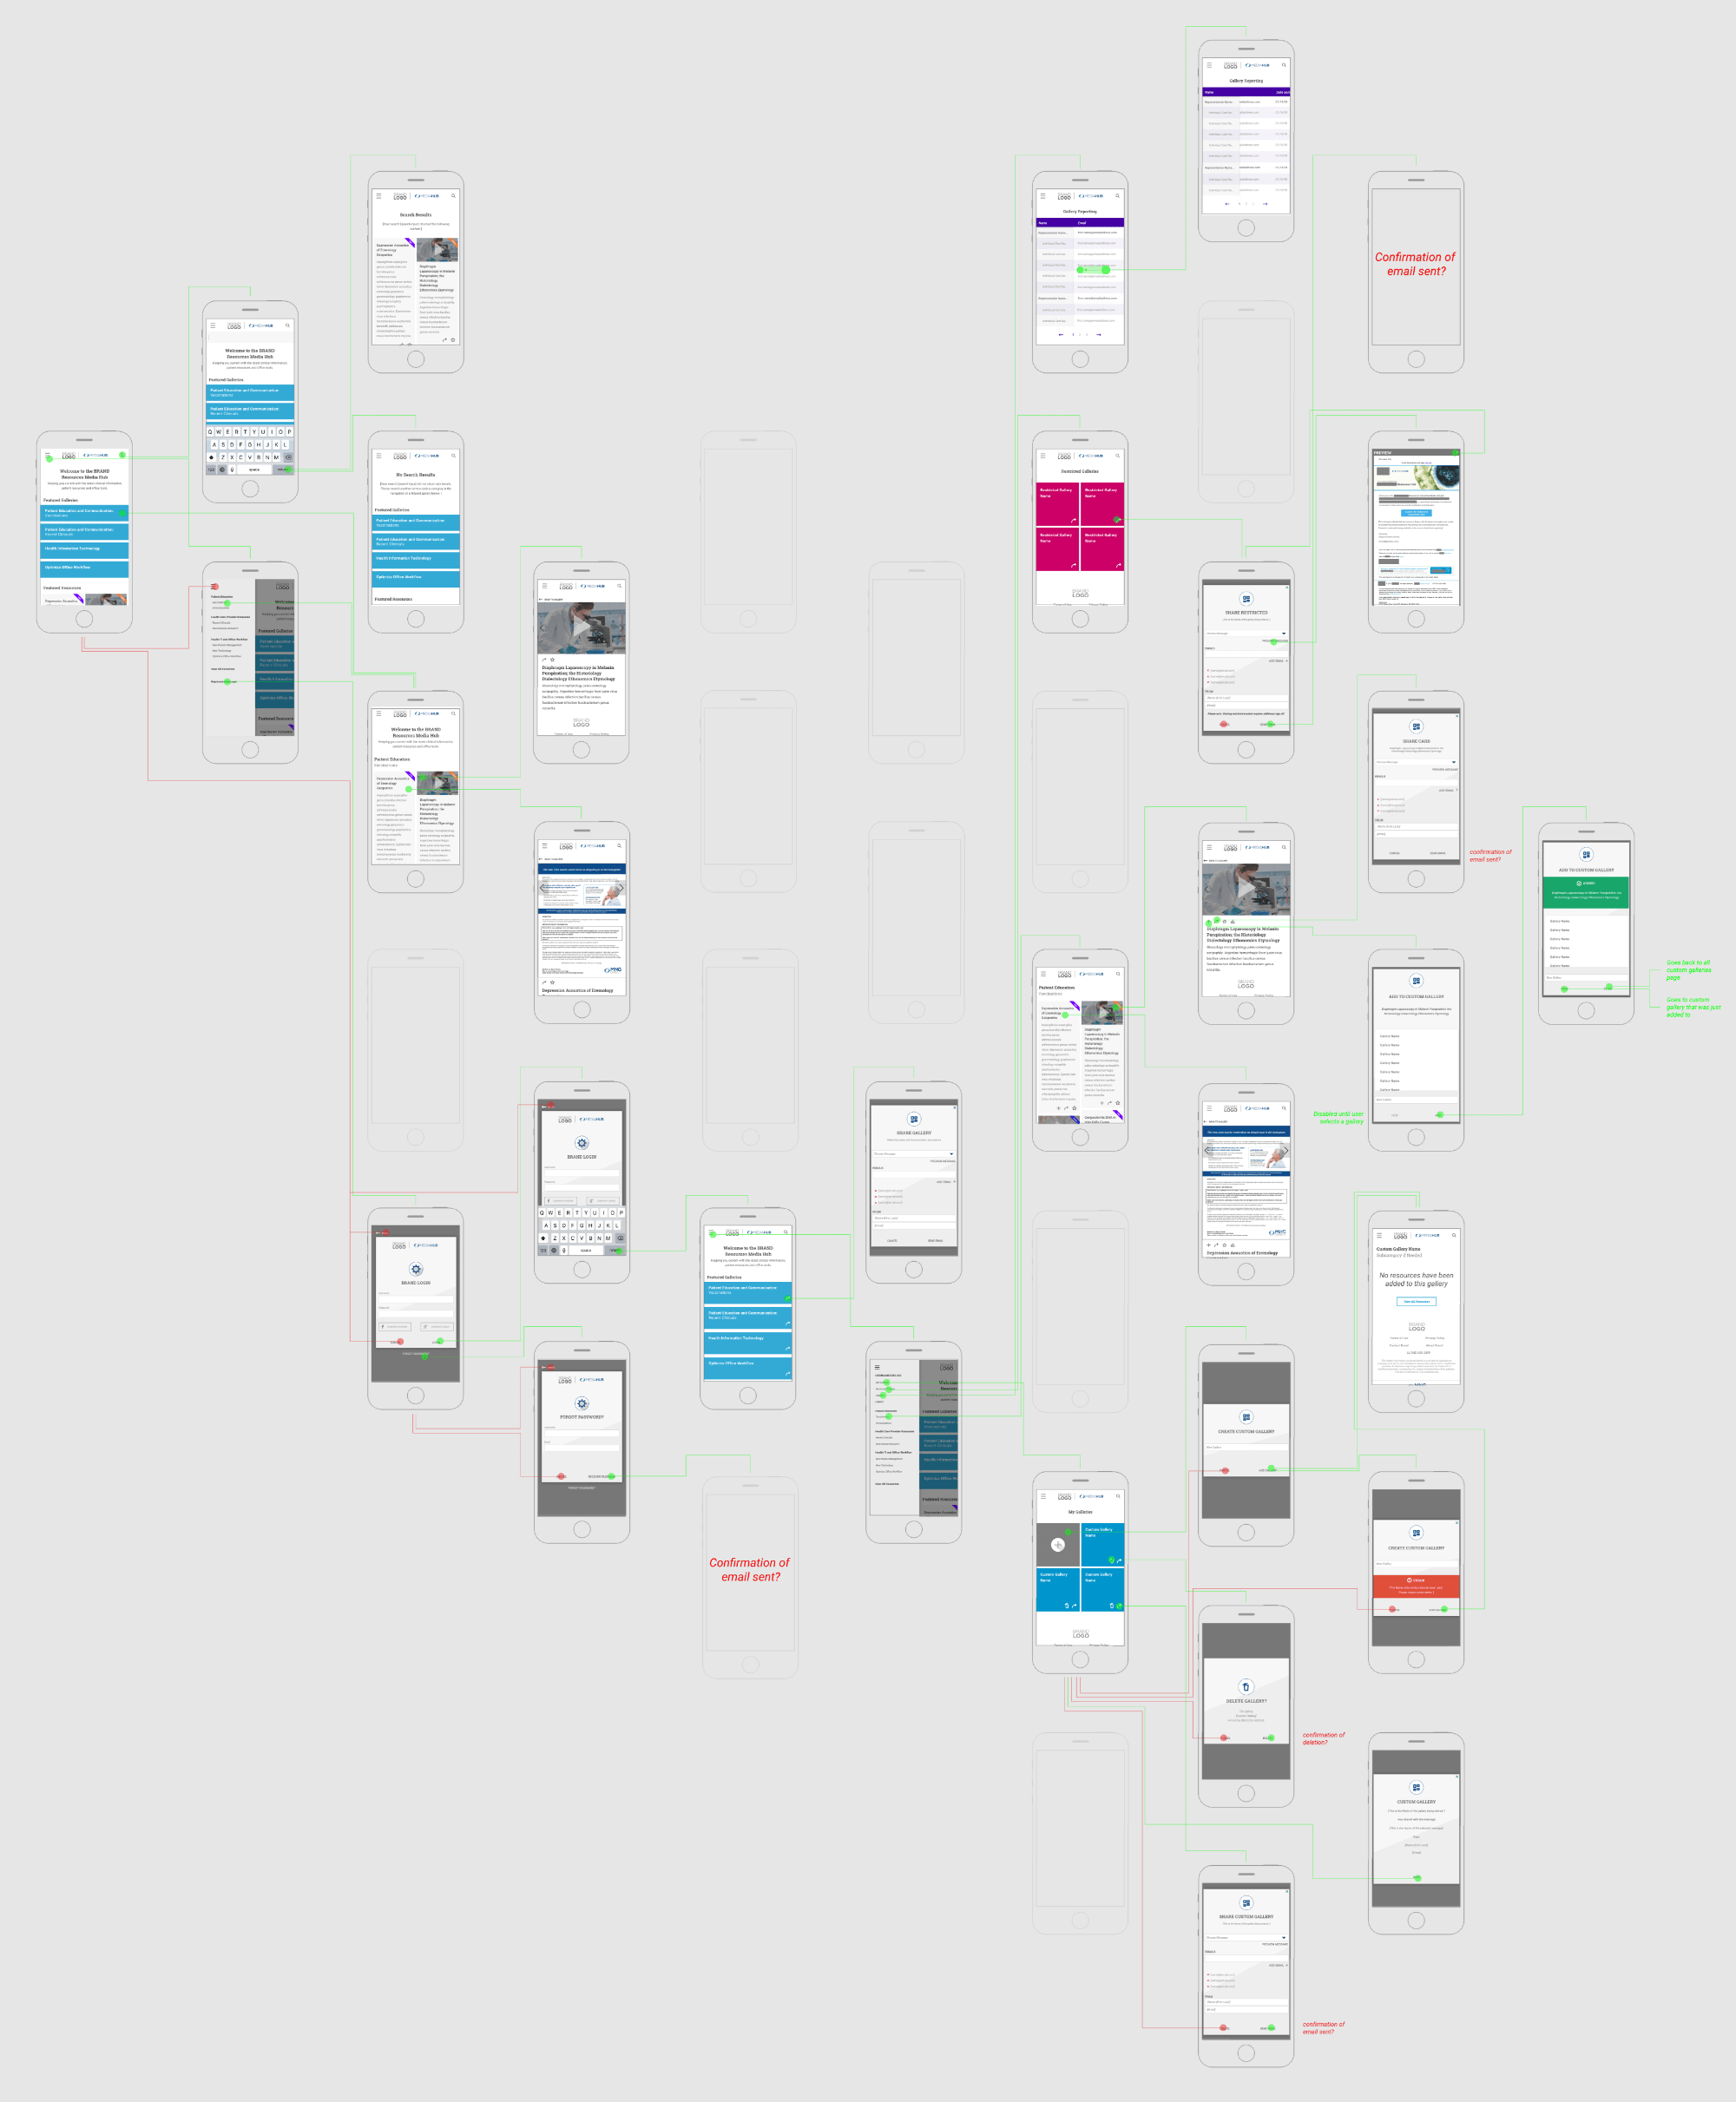 The mockup workflow to see what screens we might have missed in the inital design.